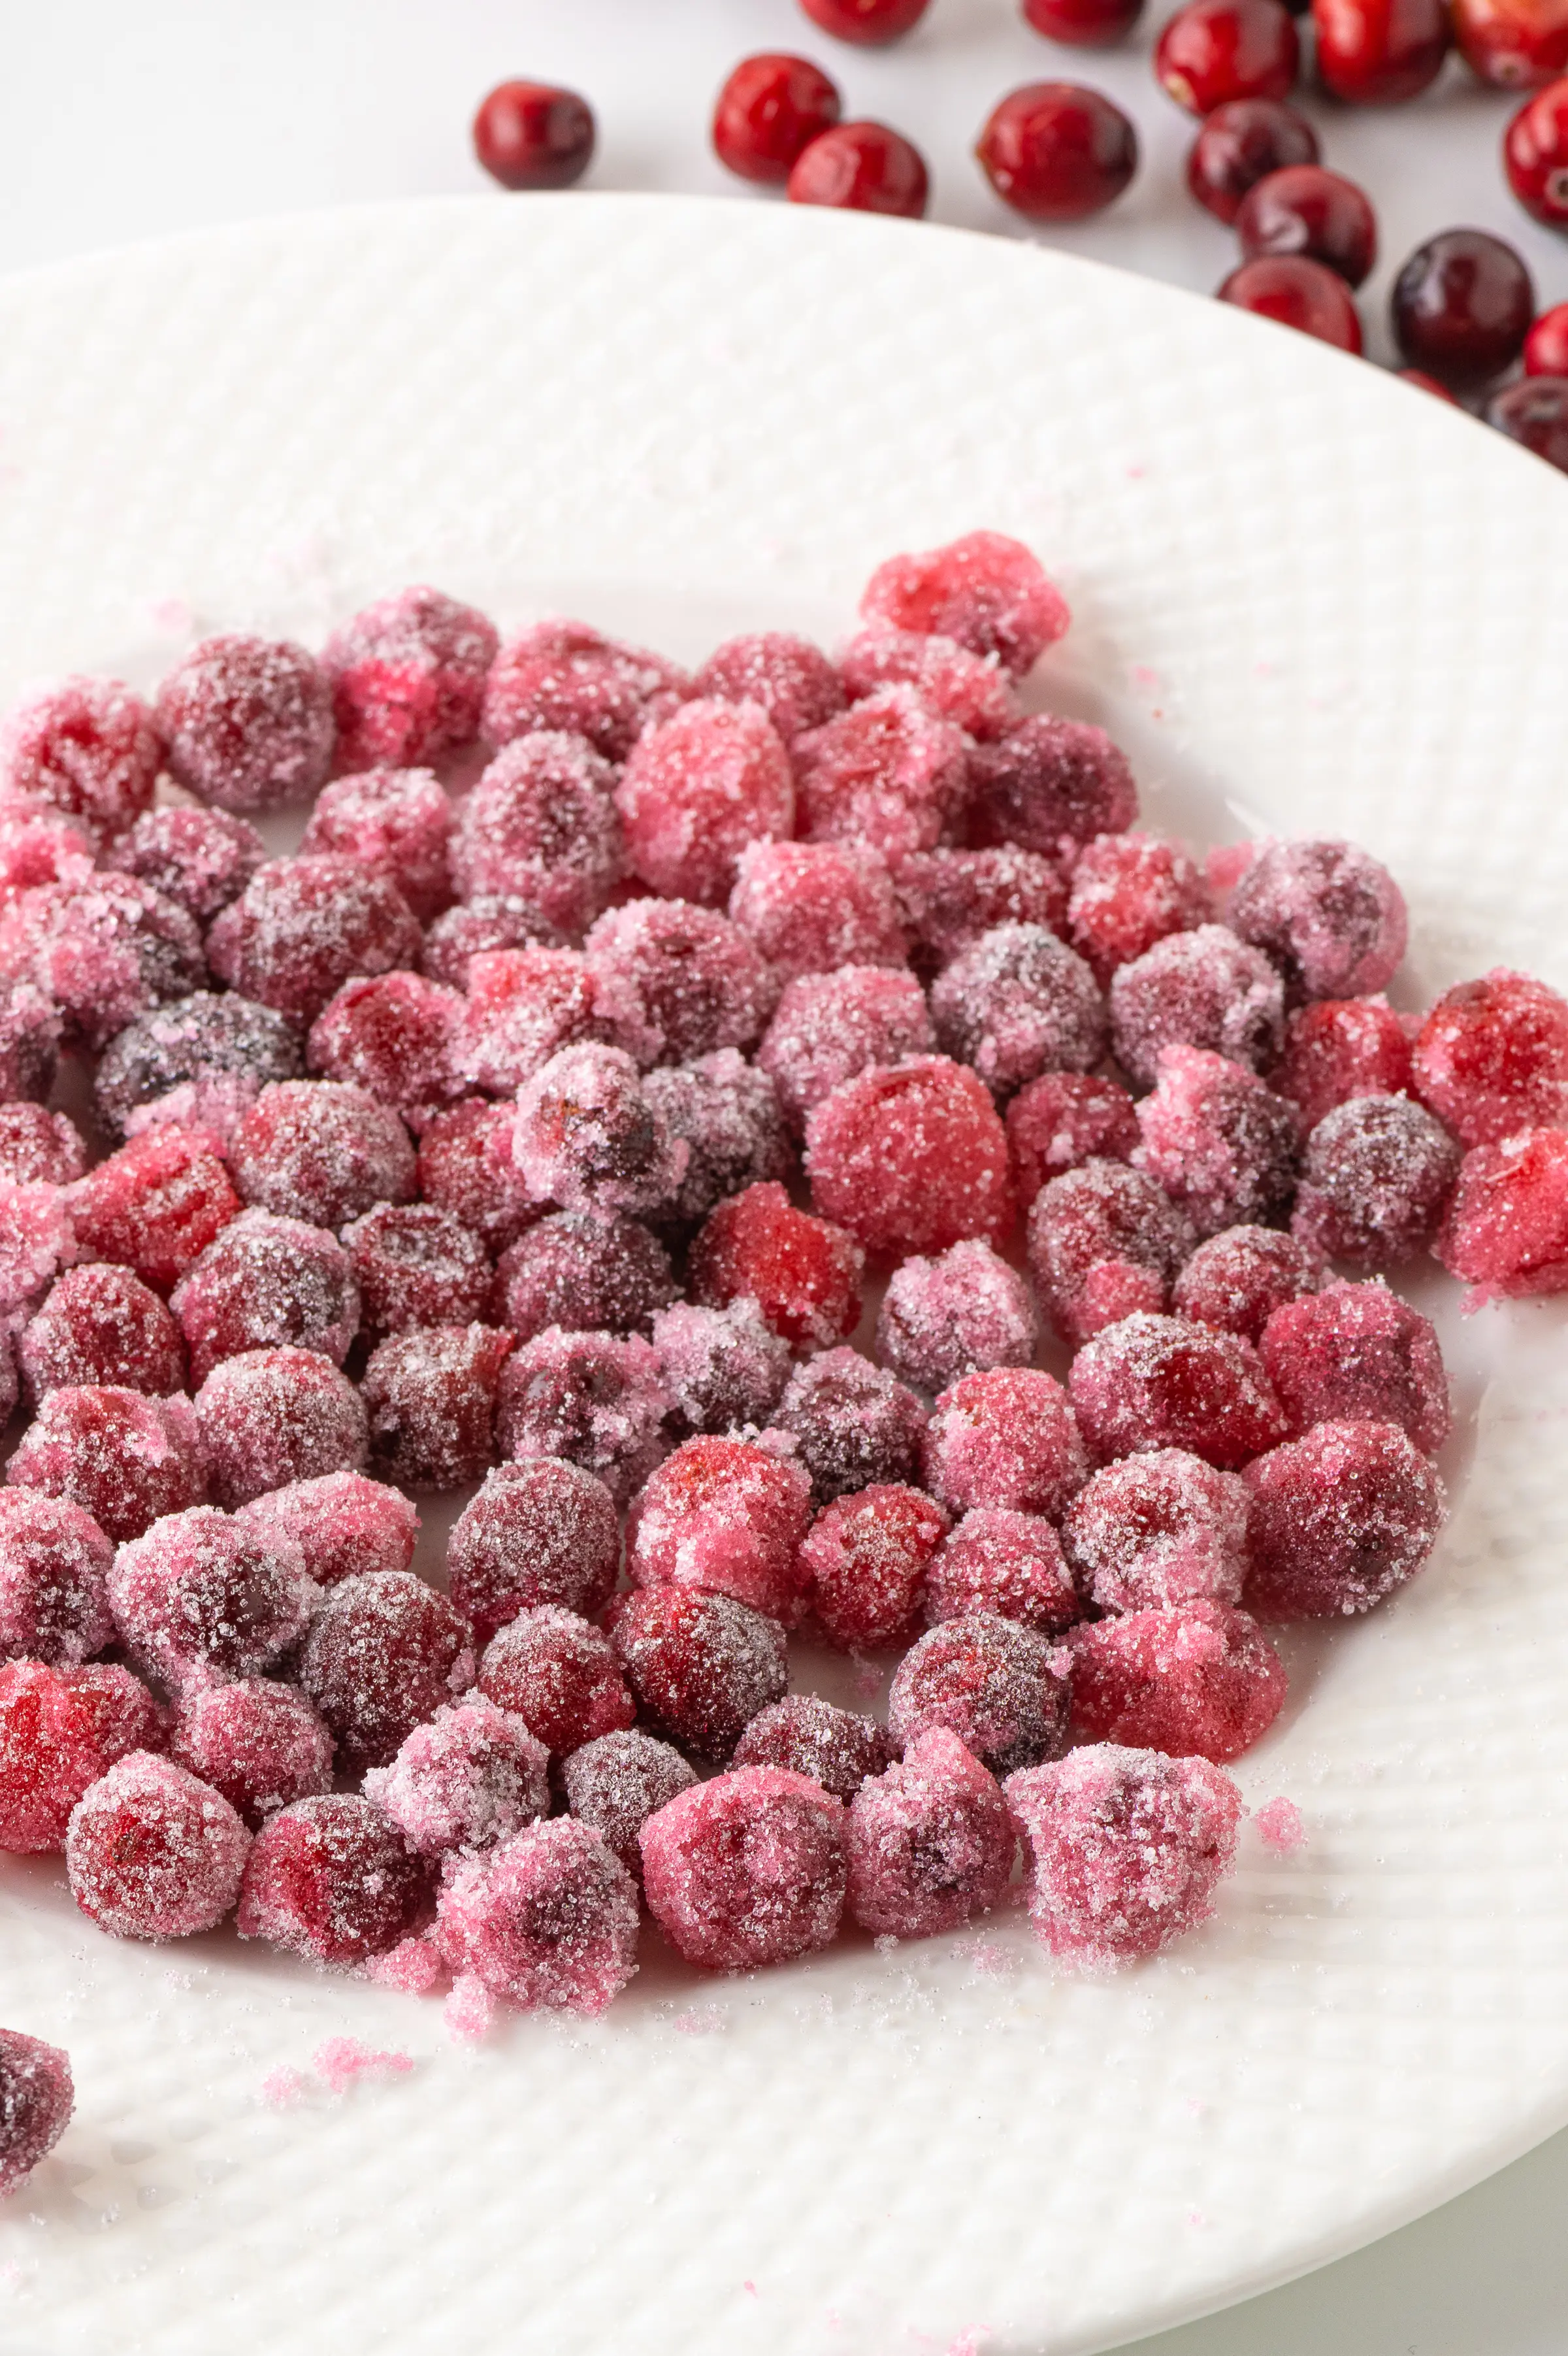 A white plate filled with red ripe cranberries coated in granular sweetener.  The berries look like they have been covered in a pink winter frost. 